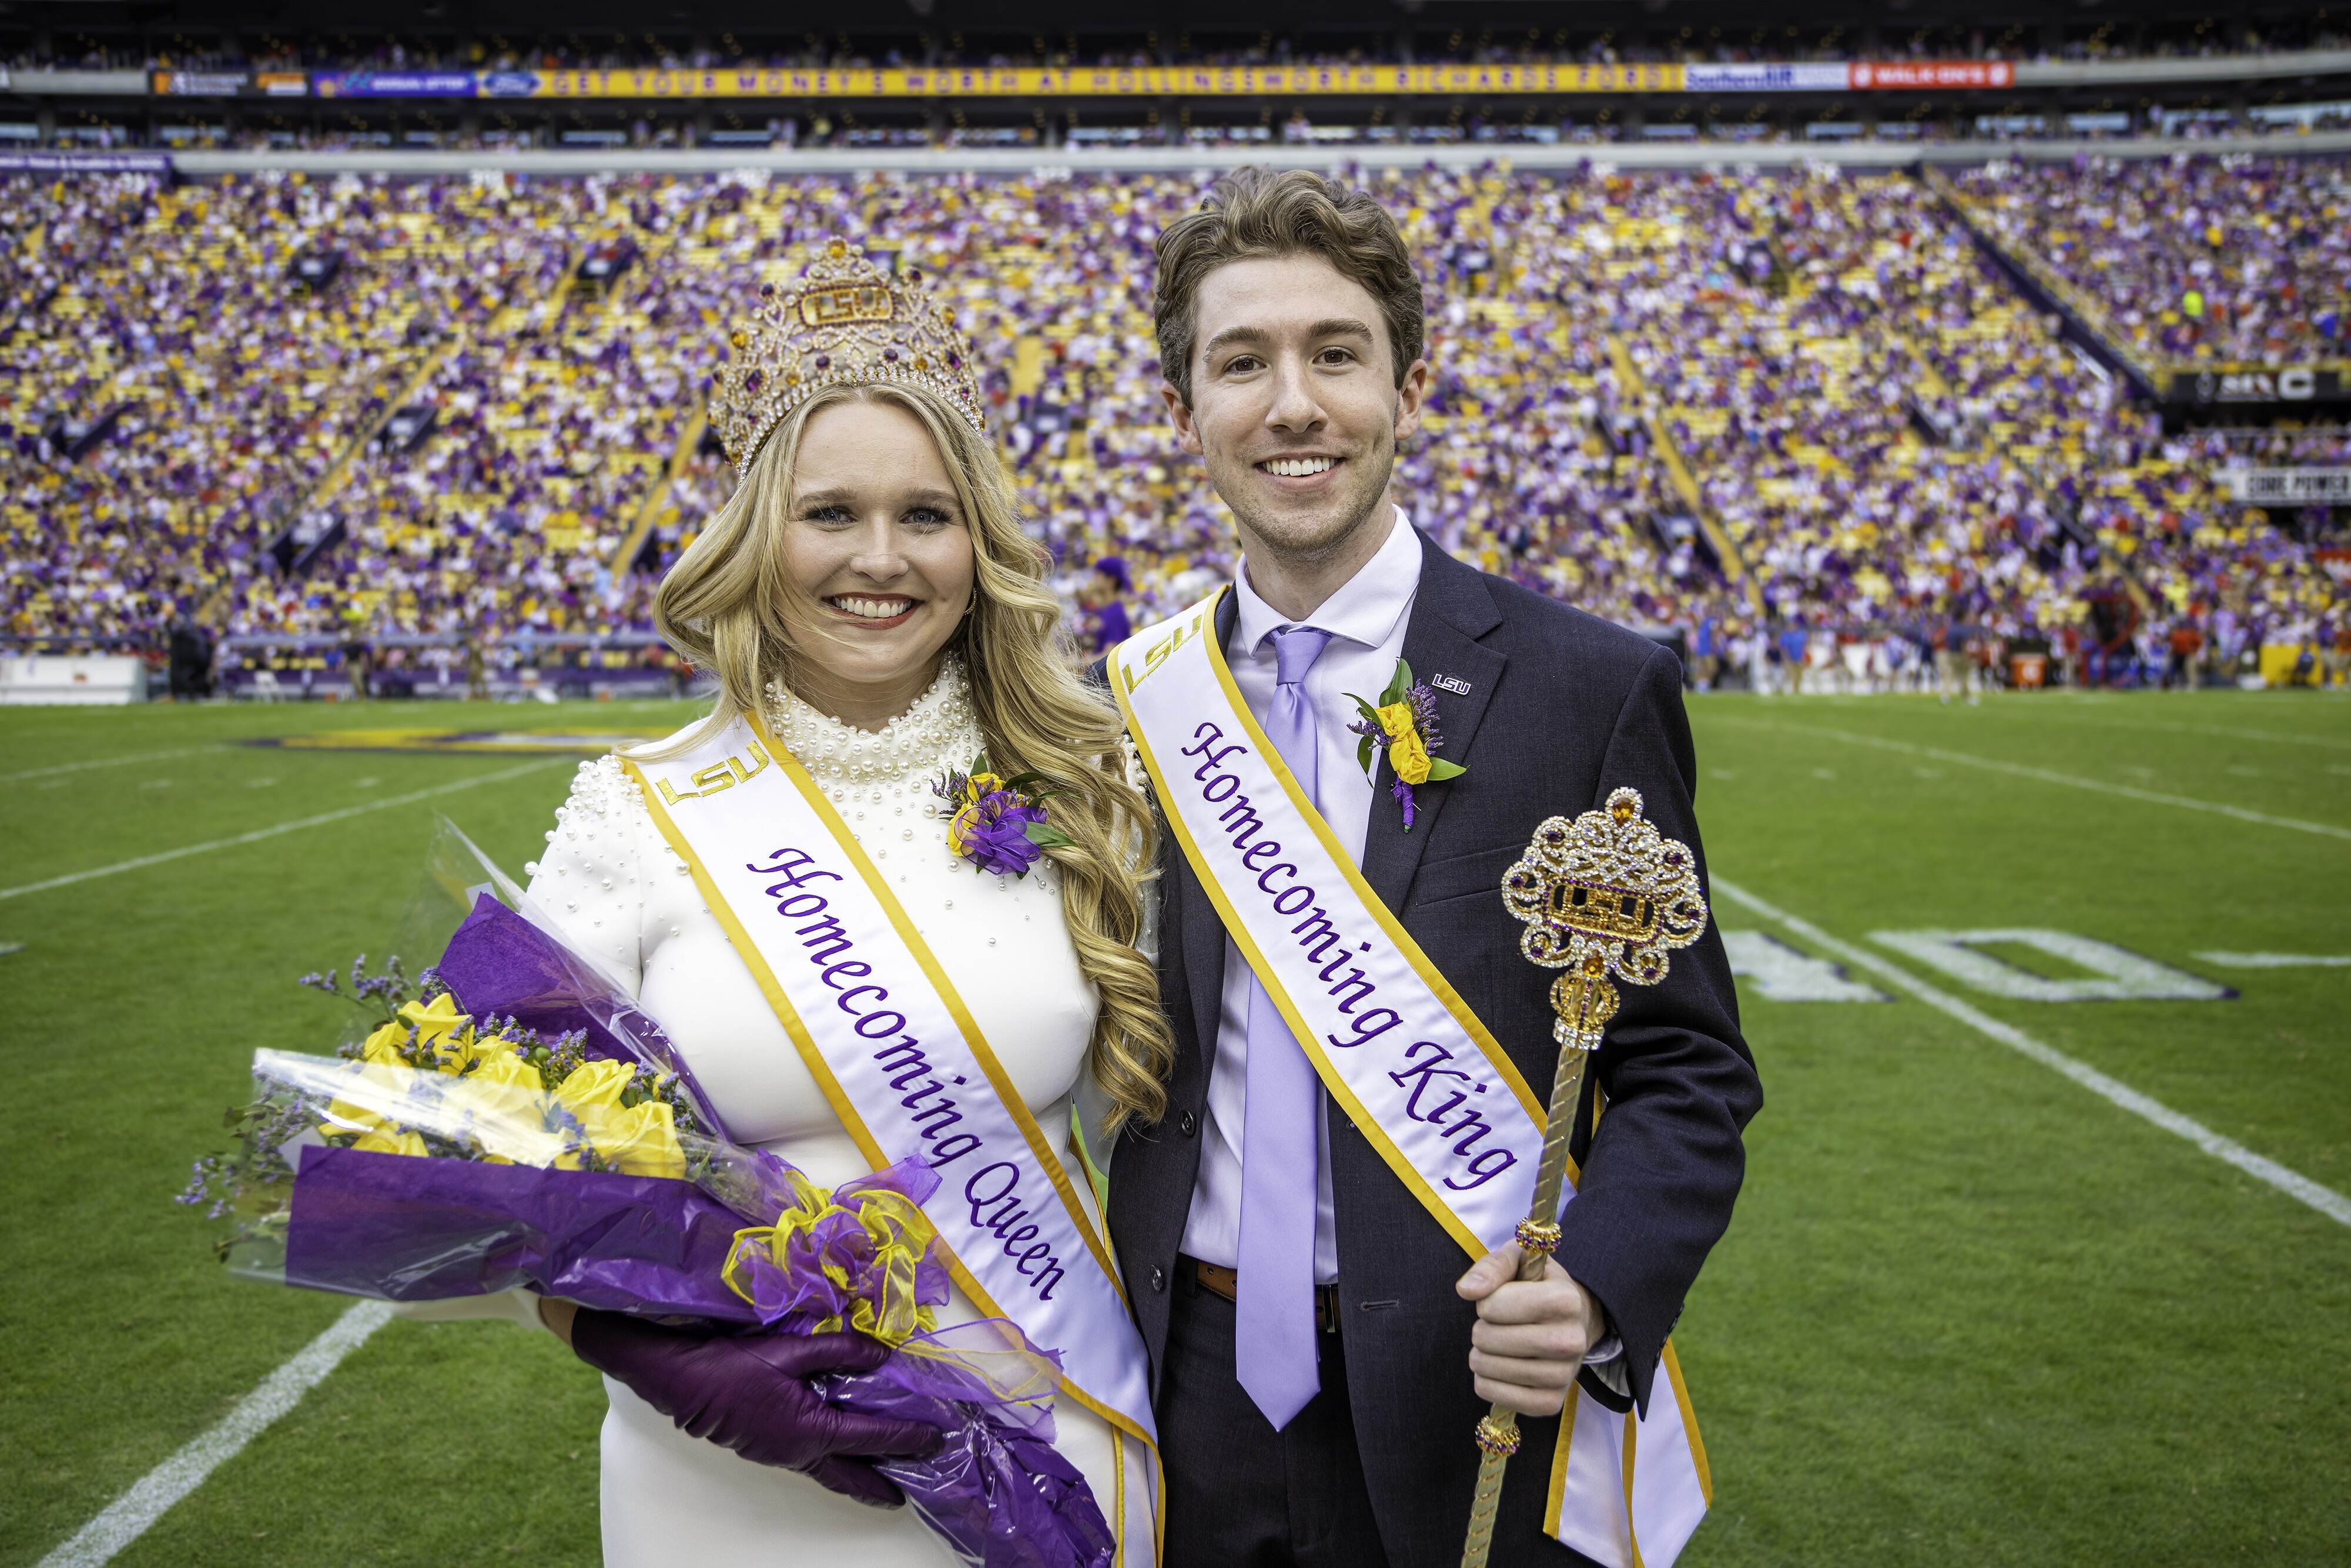 LSU Announces 2022 Homecoming Queen and King